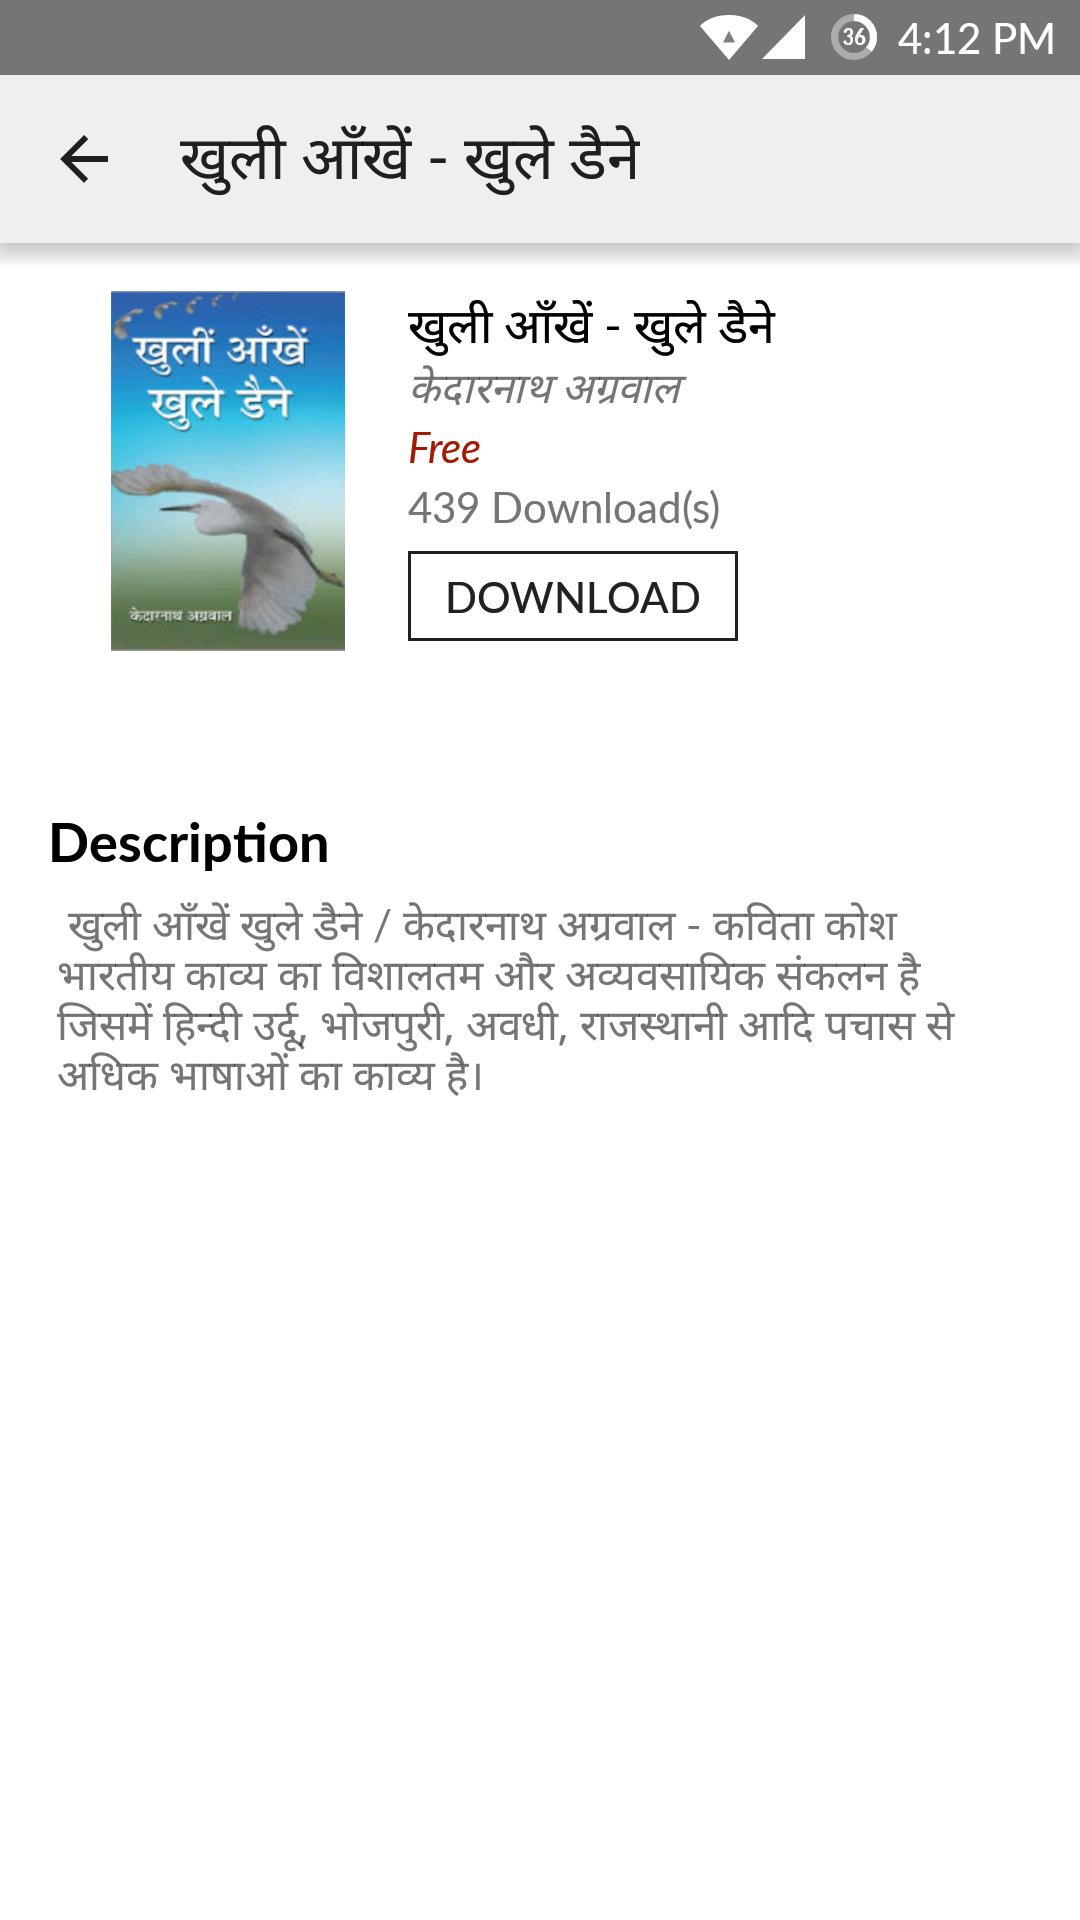 Hindi ebooks,emagazines,comics for Android - APK Download